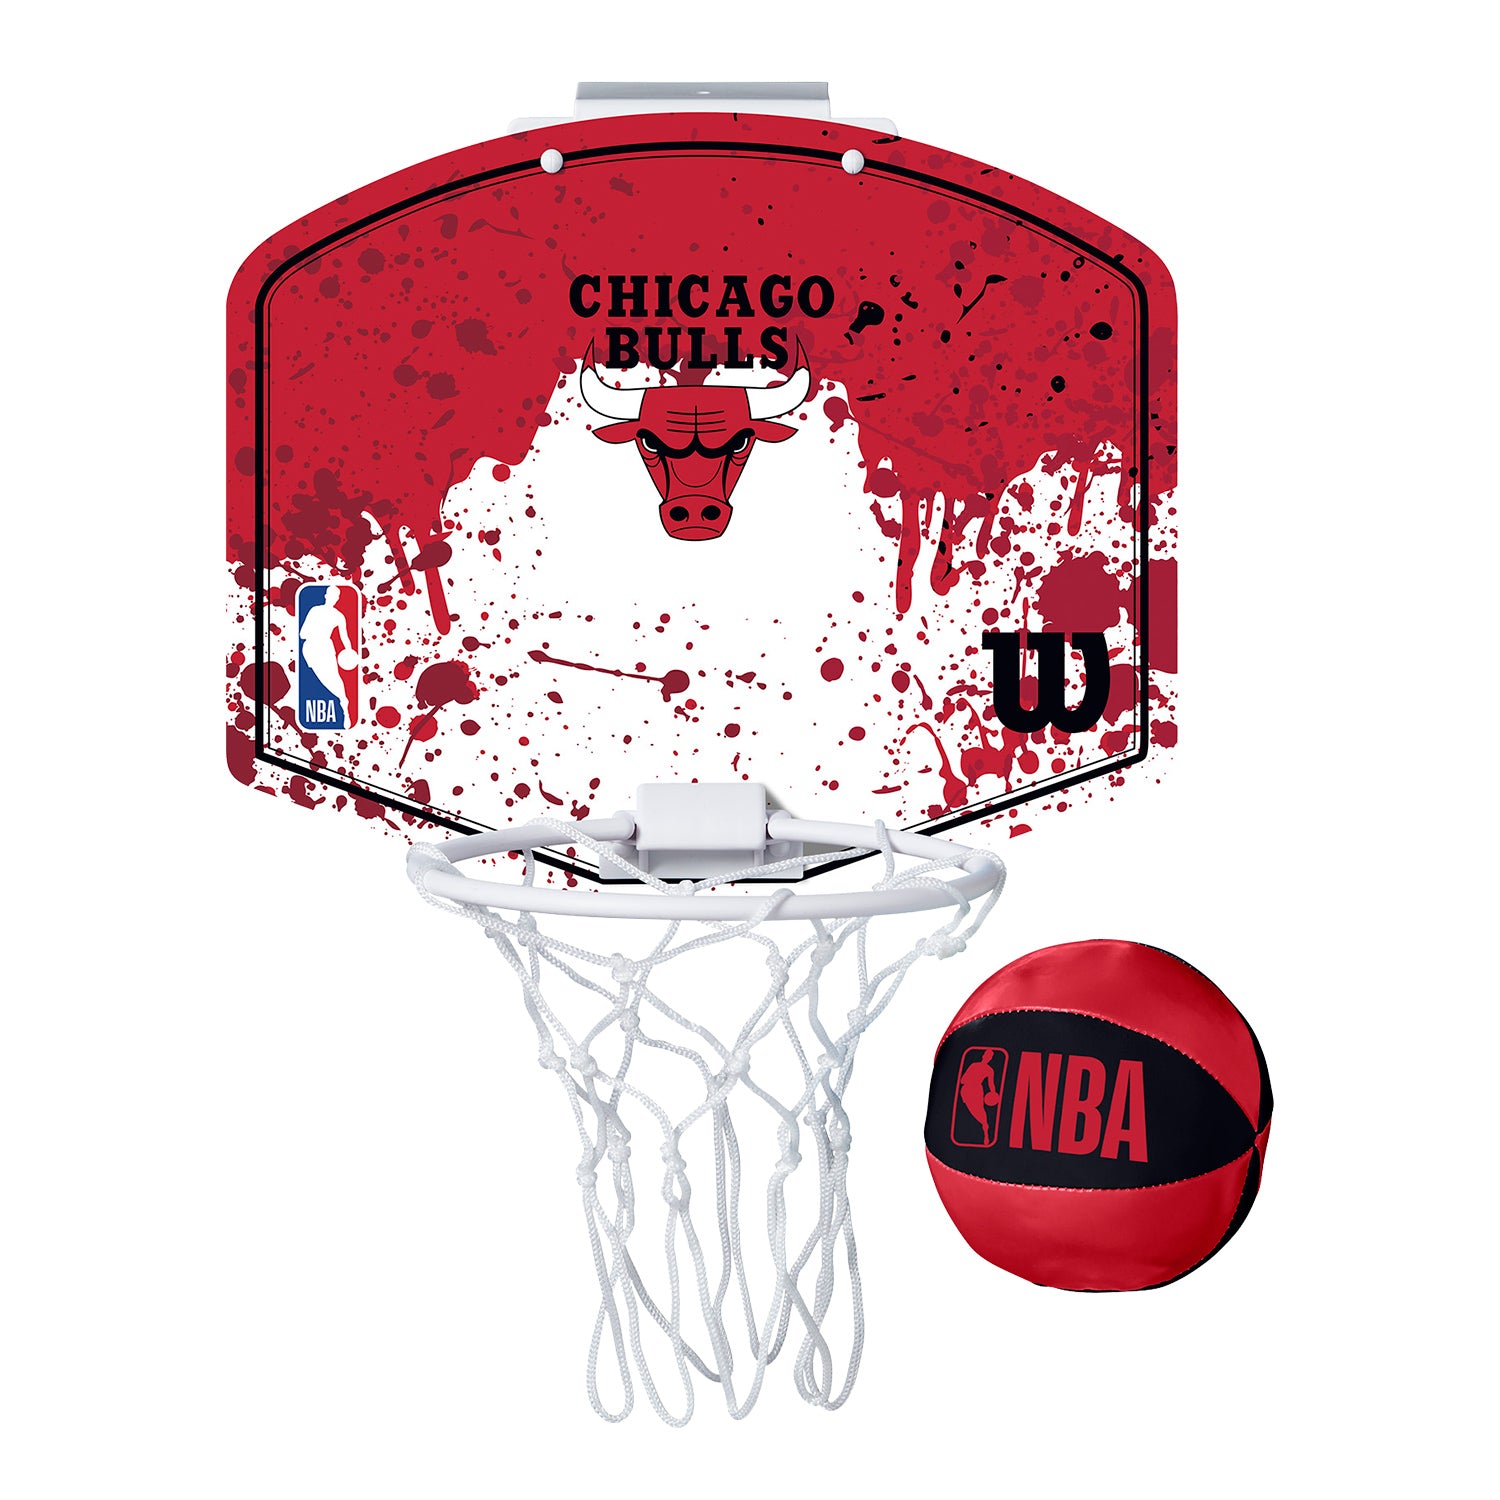 Chicago Bulls Team Mini Hoop - front view - red and white